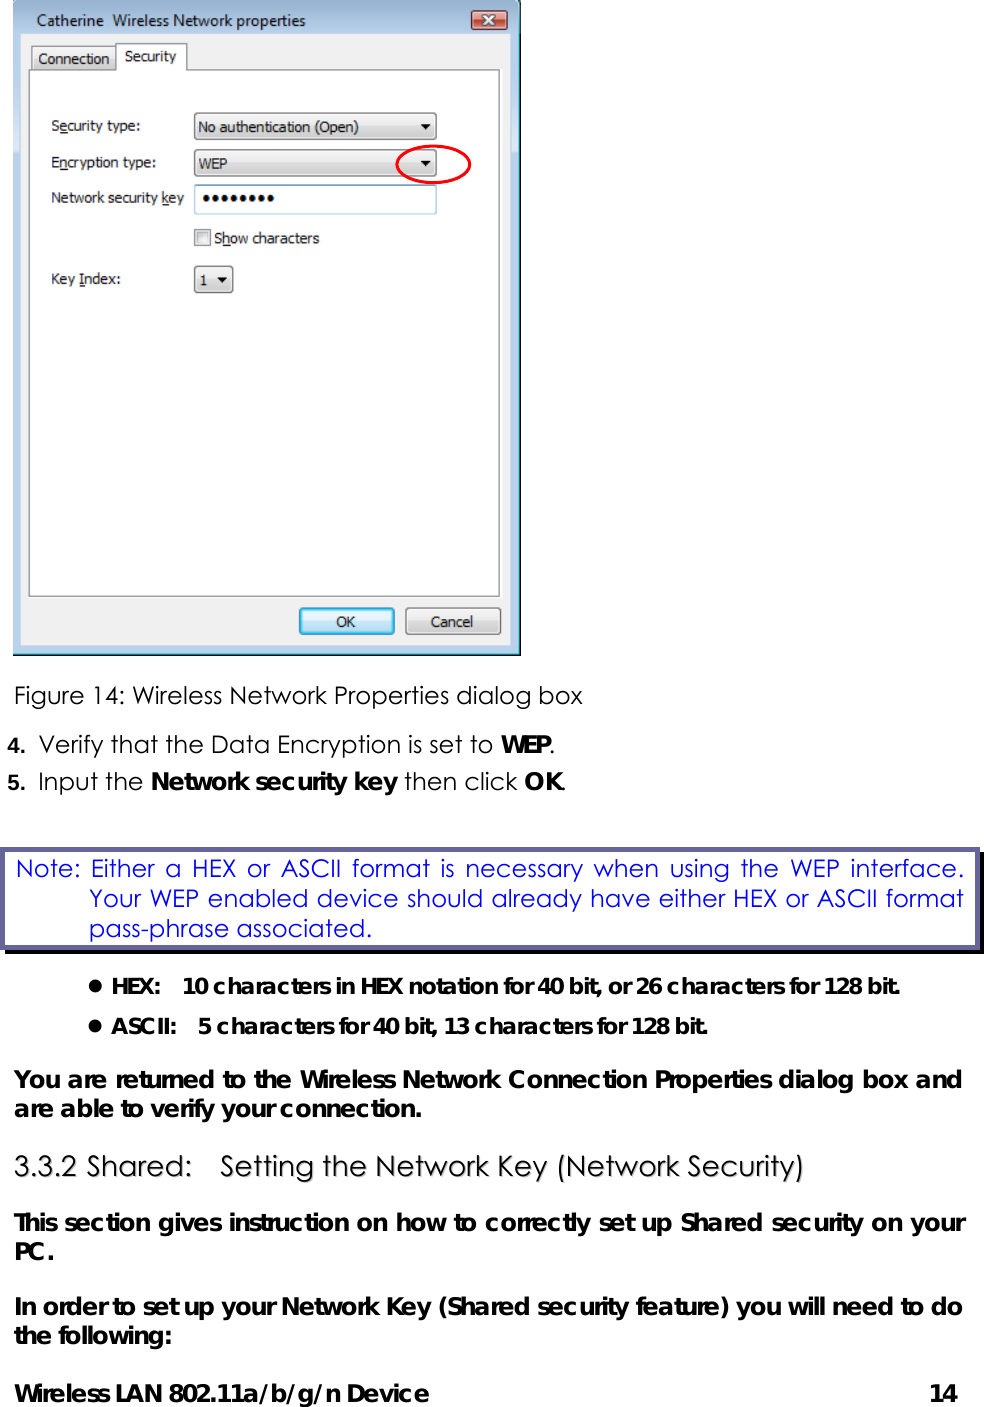 Wireless LAN 802.11a/b/g/n Device                                         14  Figure 14: Wireless Network Properties dialog box 4.  Verify that the Data Encryption is set to WEP. 5.  Input the Network security key then click OK. z HEX:    10 characters in HEX notation for 40 bit, or 26 characters for 128 bit. z ASCII:    5 characters for 40 bit, 13 characters for 128 bit. You are returned to the Wireless Network Connection Properties dialog box and are able to verify your connection.   33..33..22  SShhaarreedd::    SSeettttiinngg  tthhee  NNeettwwoorrkk  KKeeyy  ((NNeettwwoorrkk  SSeeccuurriittyy))  This section gives instruction on how to correctly set up Shared security on your PC.  In order to set up your Network Key (Shared security feature) you will need to do the following: Note: Either a HEX or ASCII format is necessary when using the WEP interface. Your WEP enabled device should already have either HEX or ASCII format pass-phrase associated. 